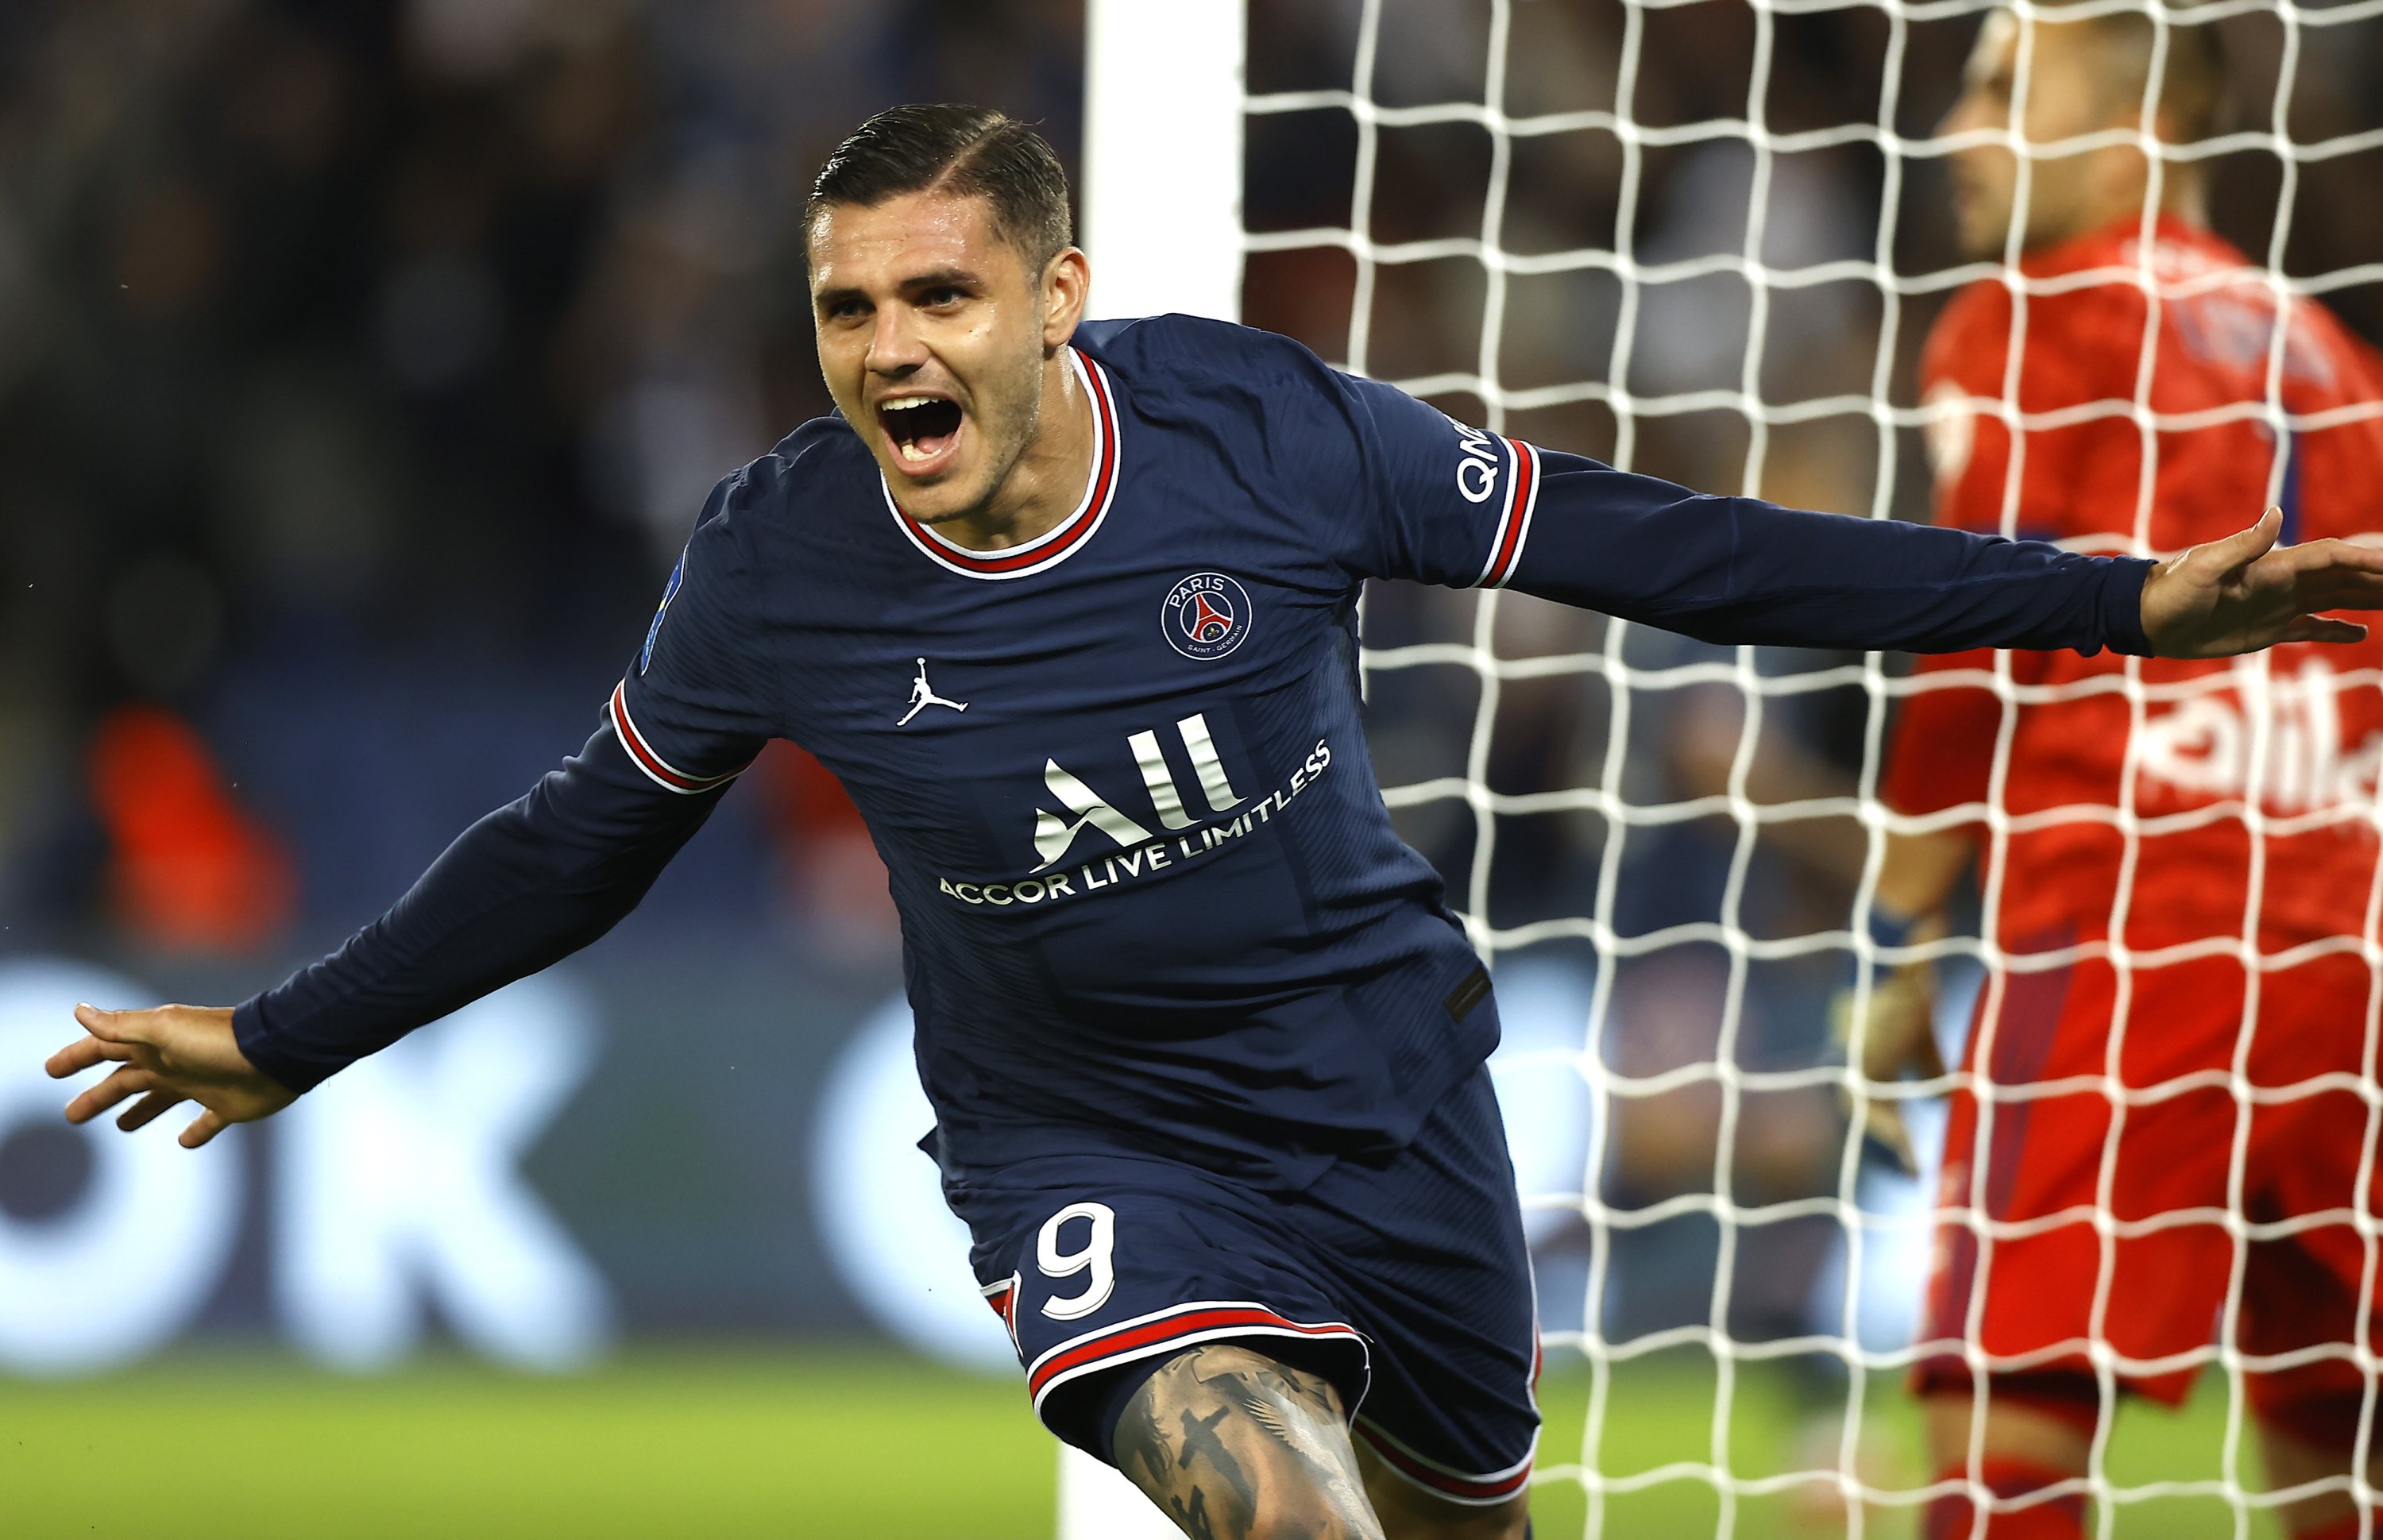 Icardi grabs PSG winner over Lyon as Messi subbed in home debut